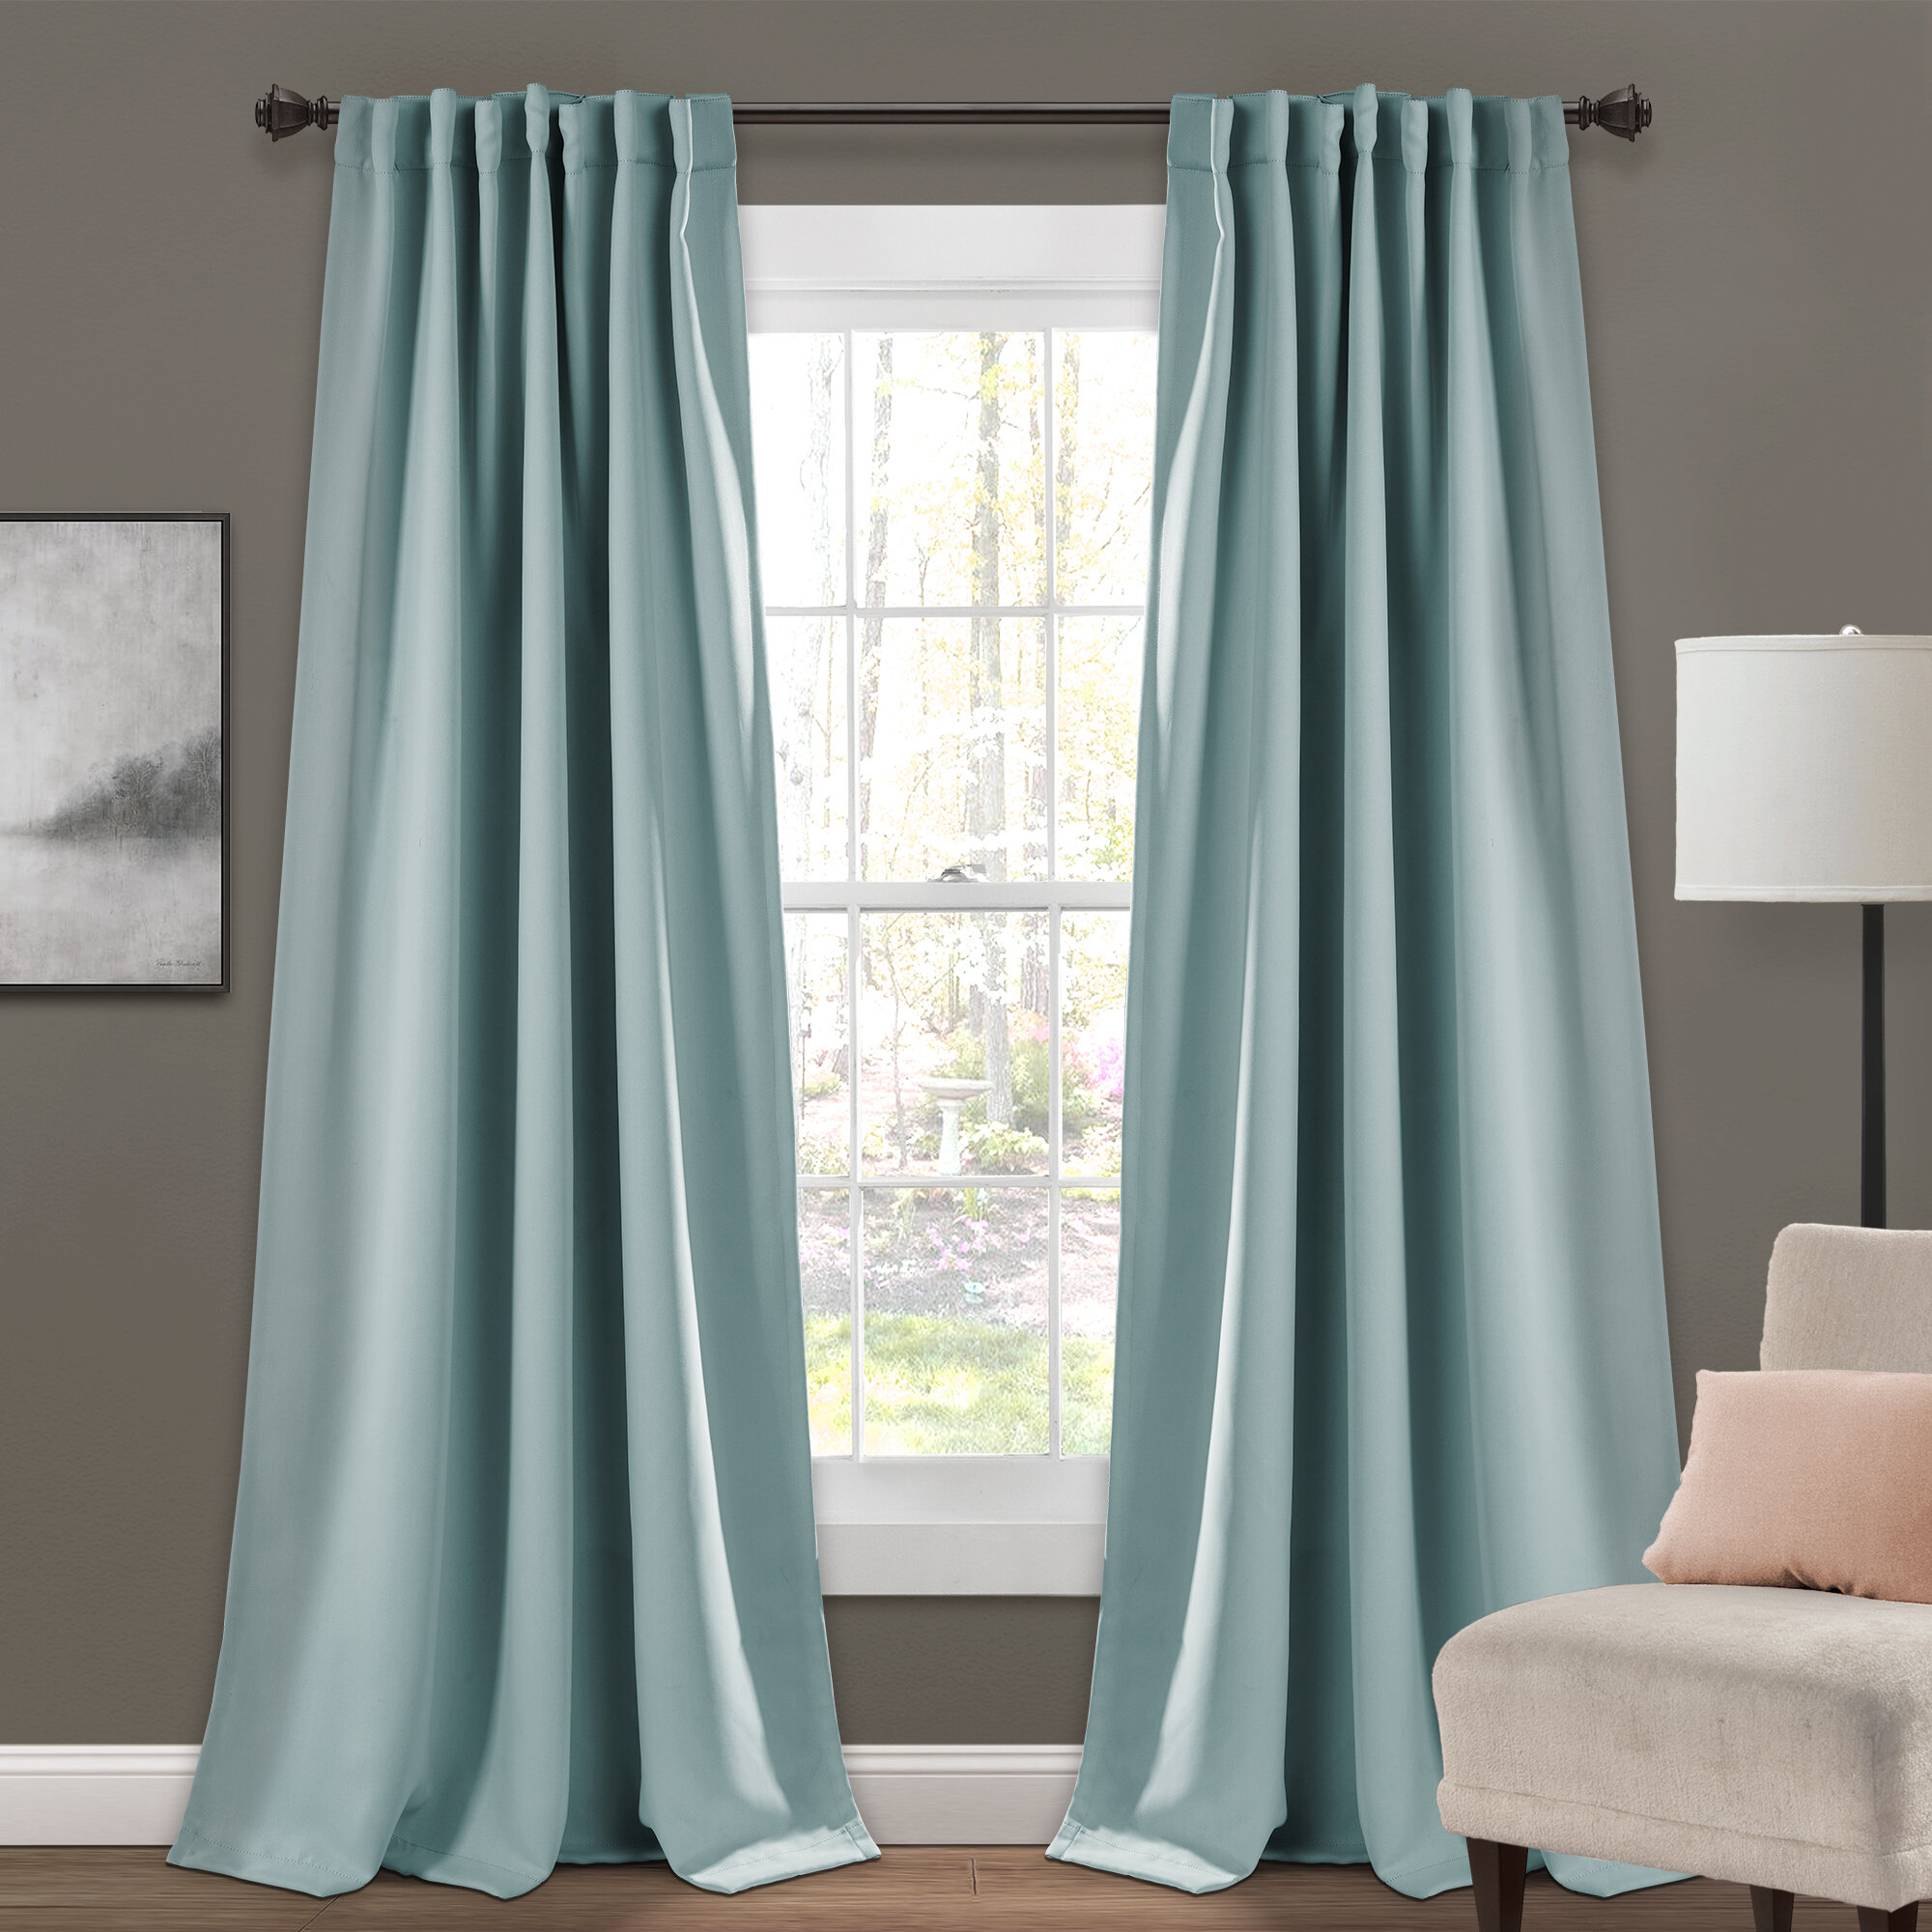 Darby Home Co Bohannan Polyester Blackout Curtain Pair & Reviews